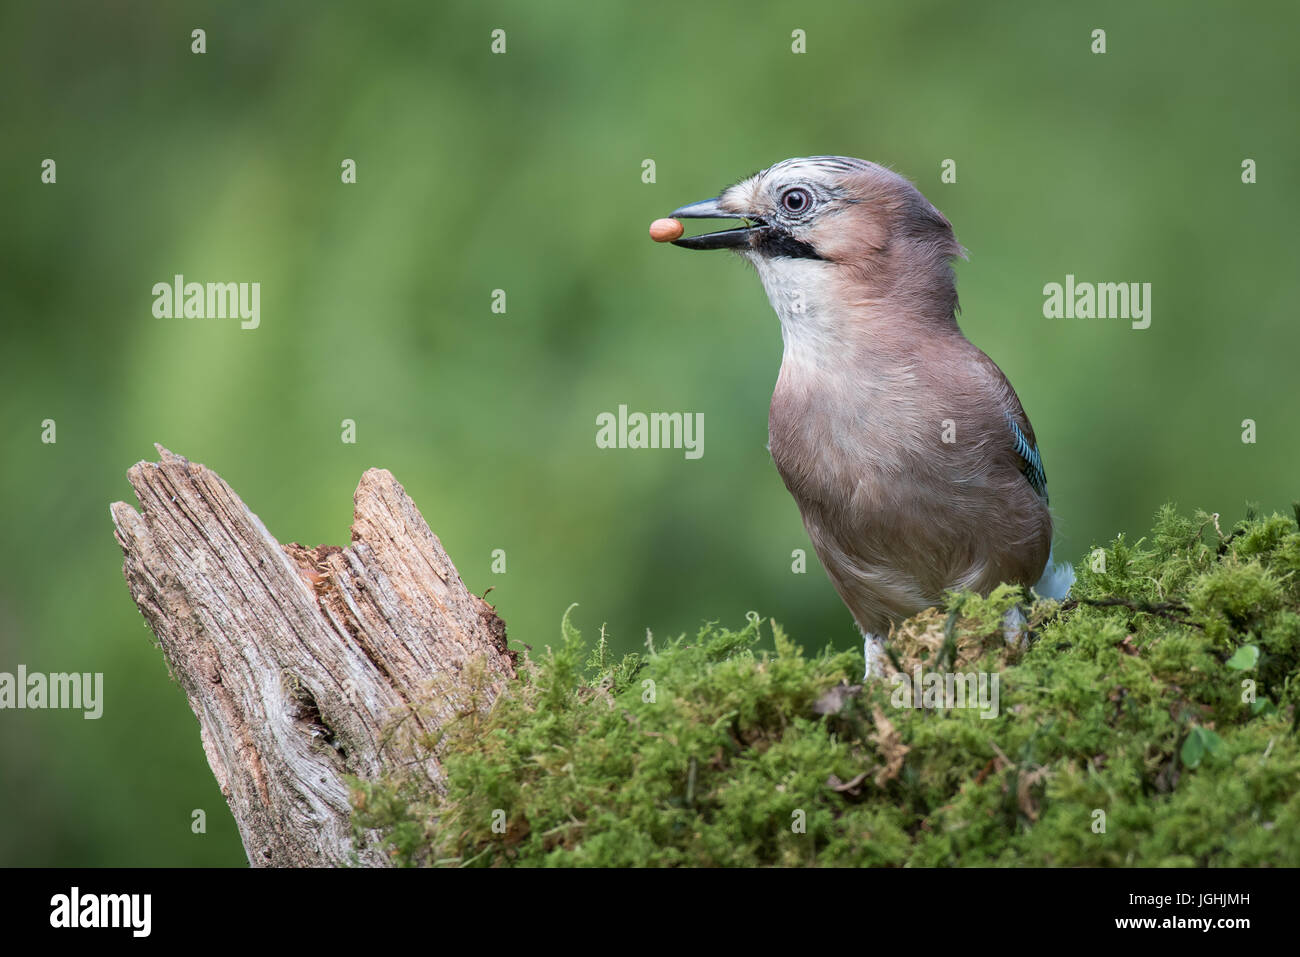 A profile portrait of a eurasian jay standing on lichen with a peanut in its beak looking left Stock Photo